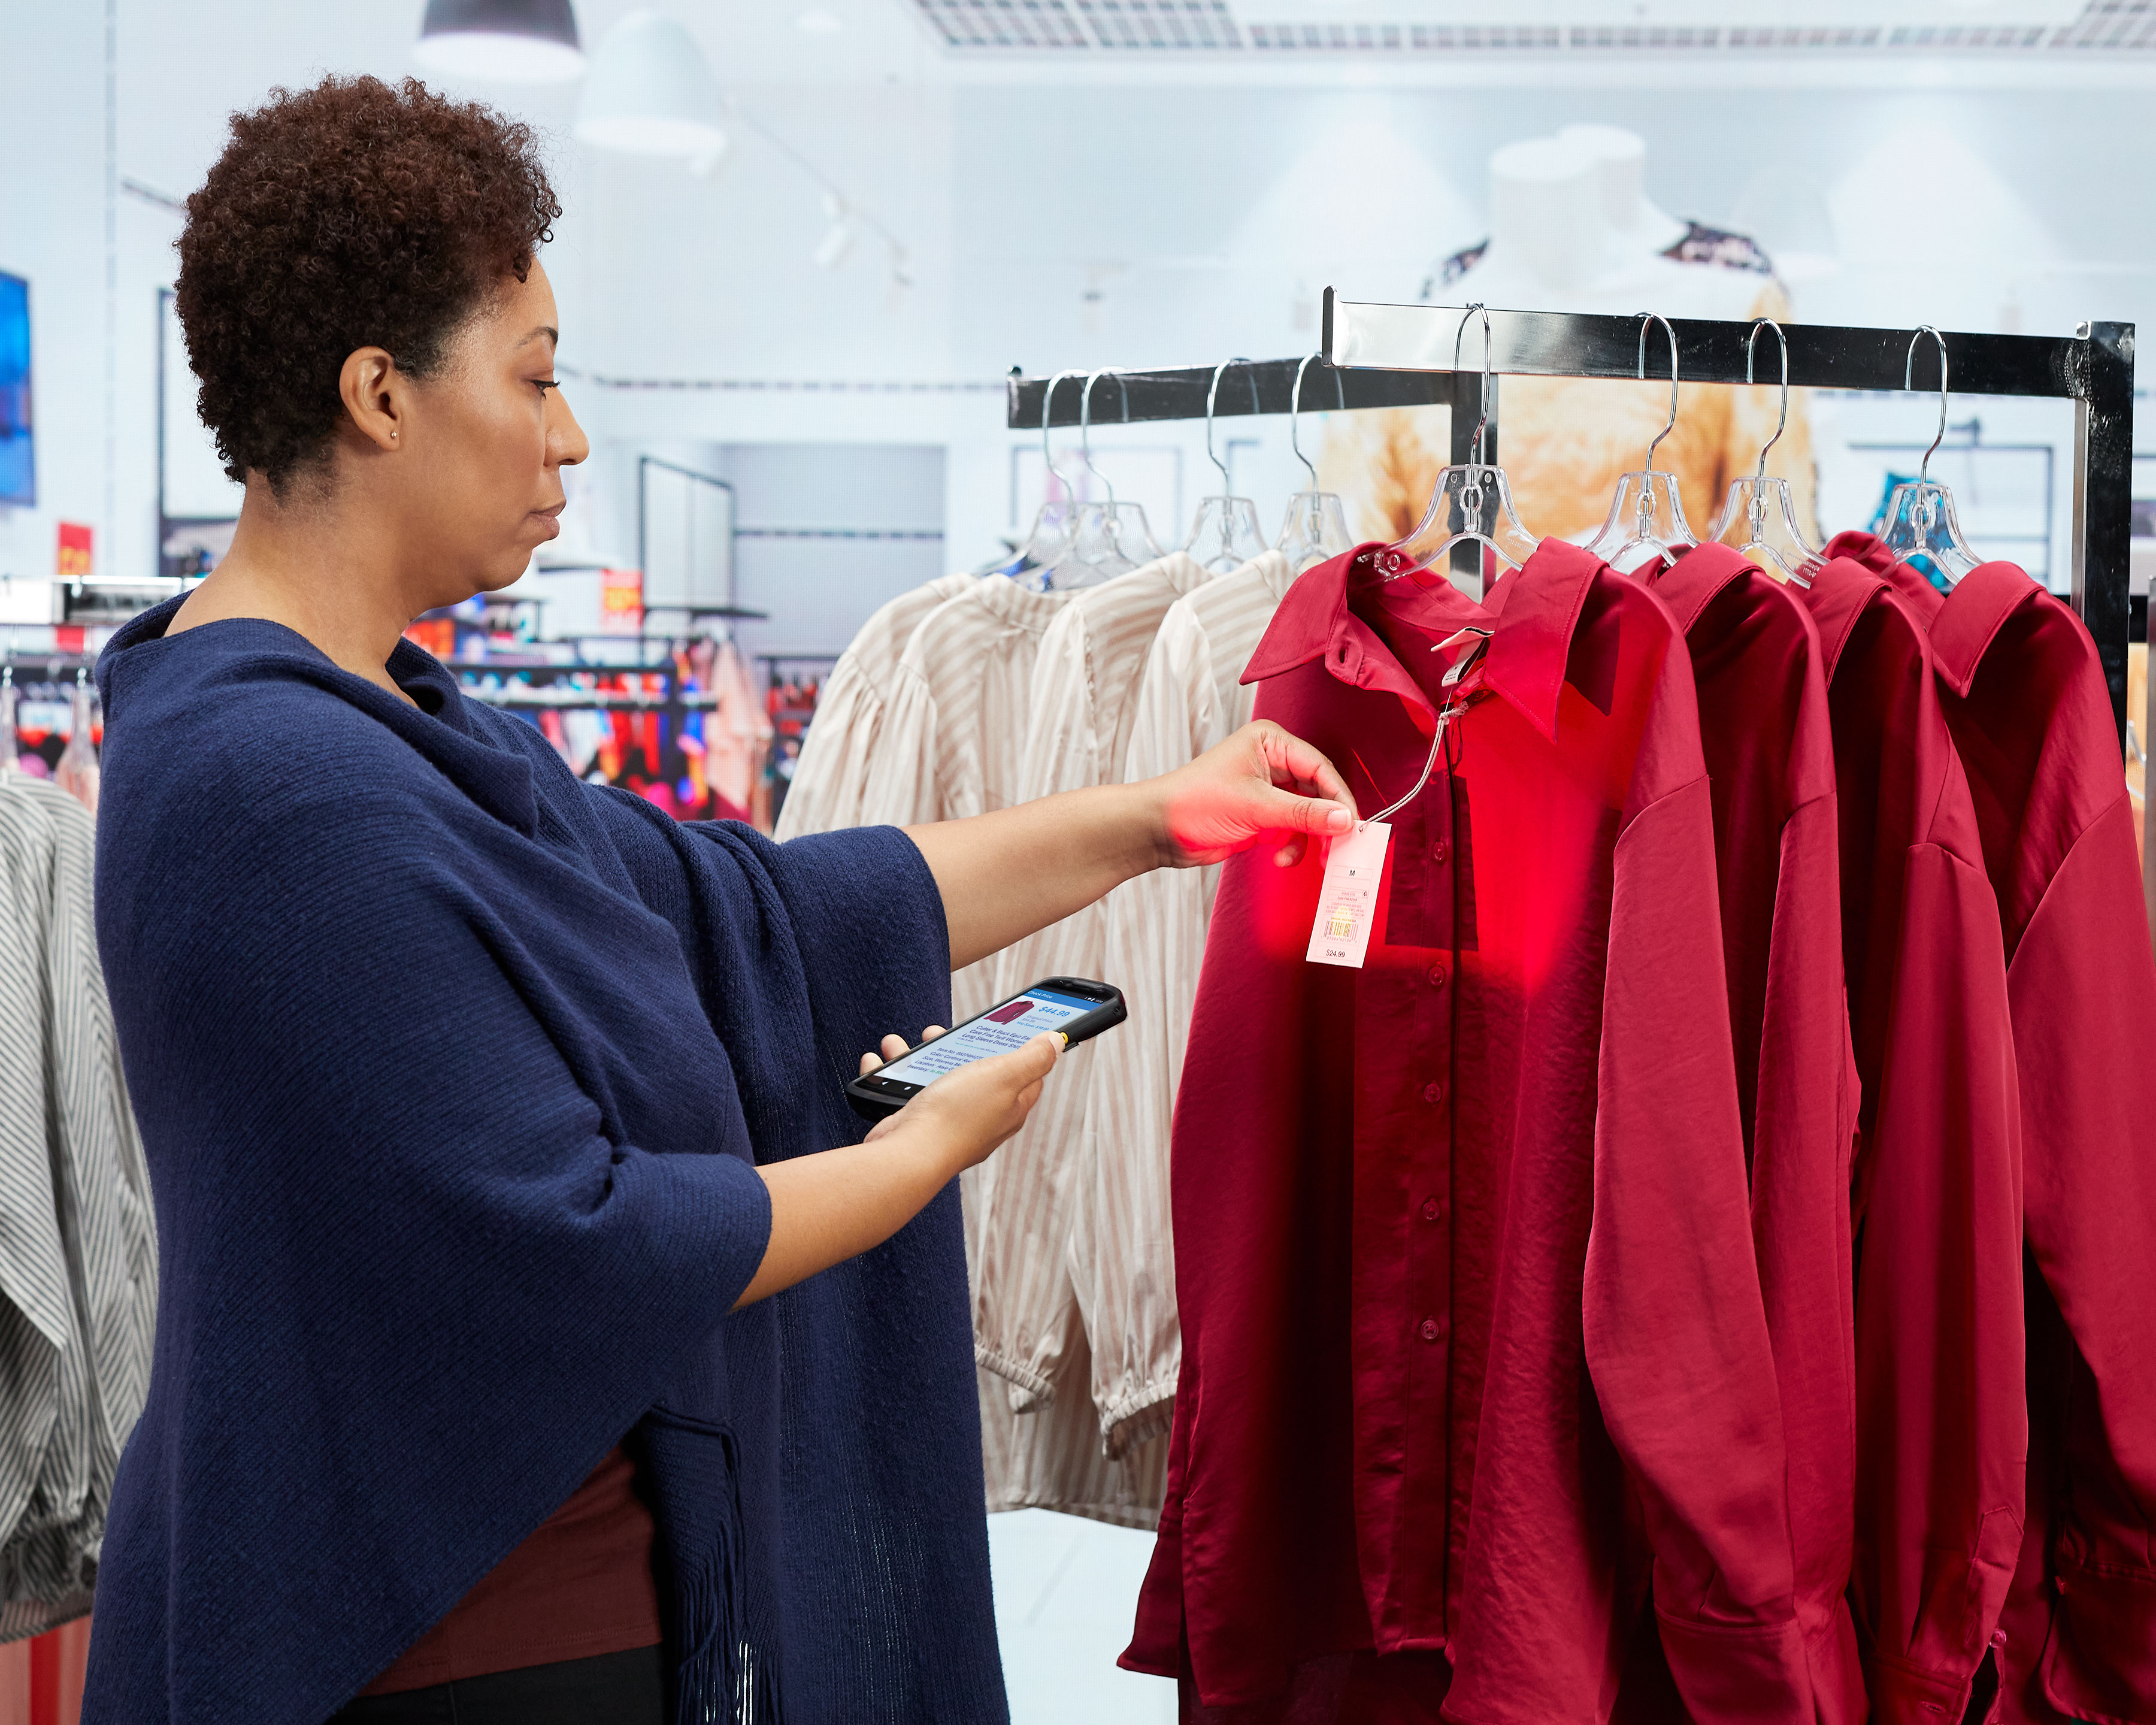 Retail worker scanning the tag on a row of red blouses